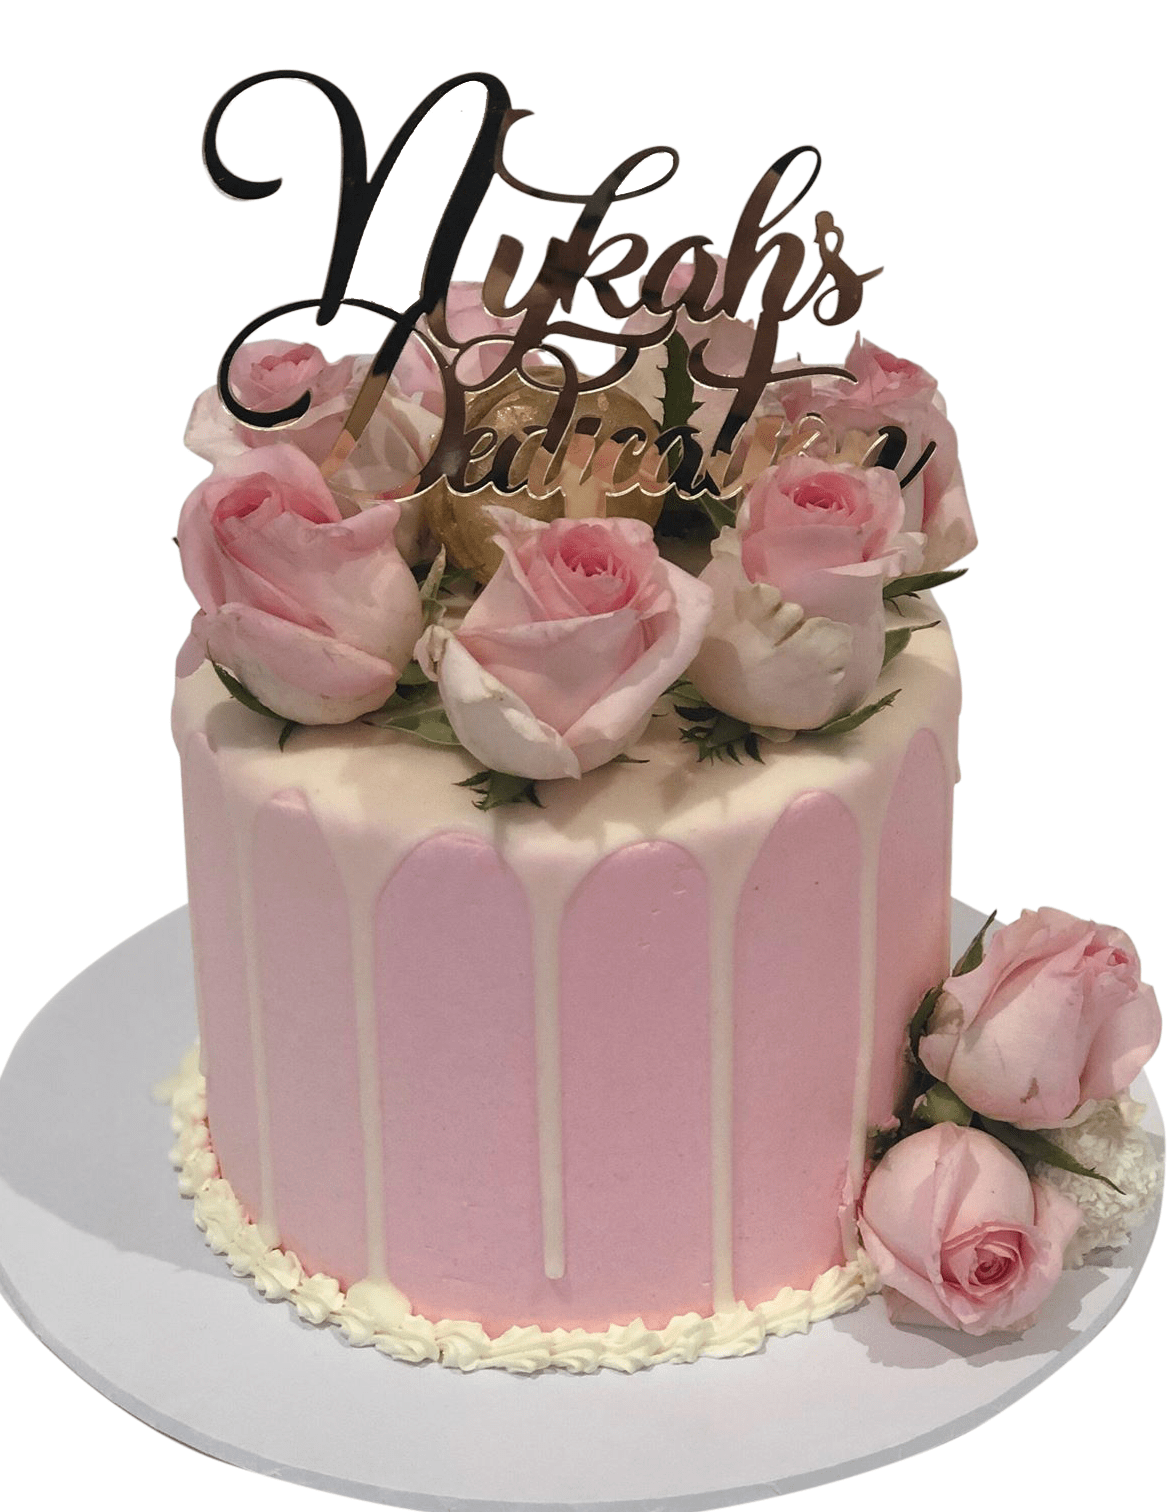 Cake Creations by Kate™ SpecialityCakes Pretty in Pink and White Speciality Cake